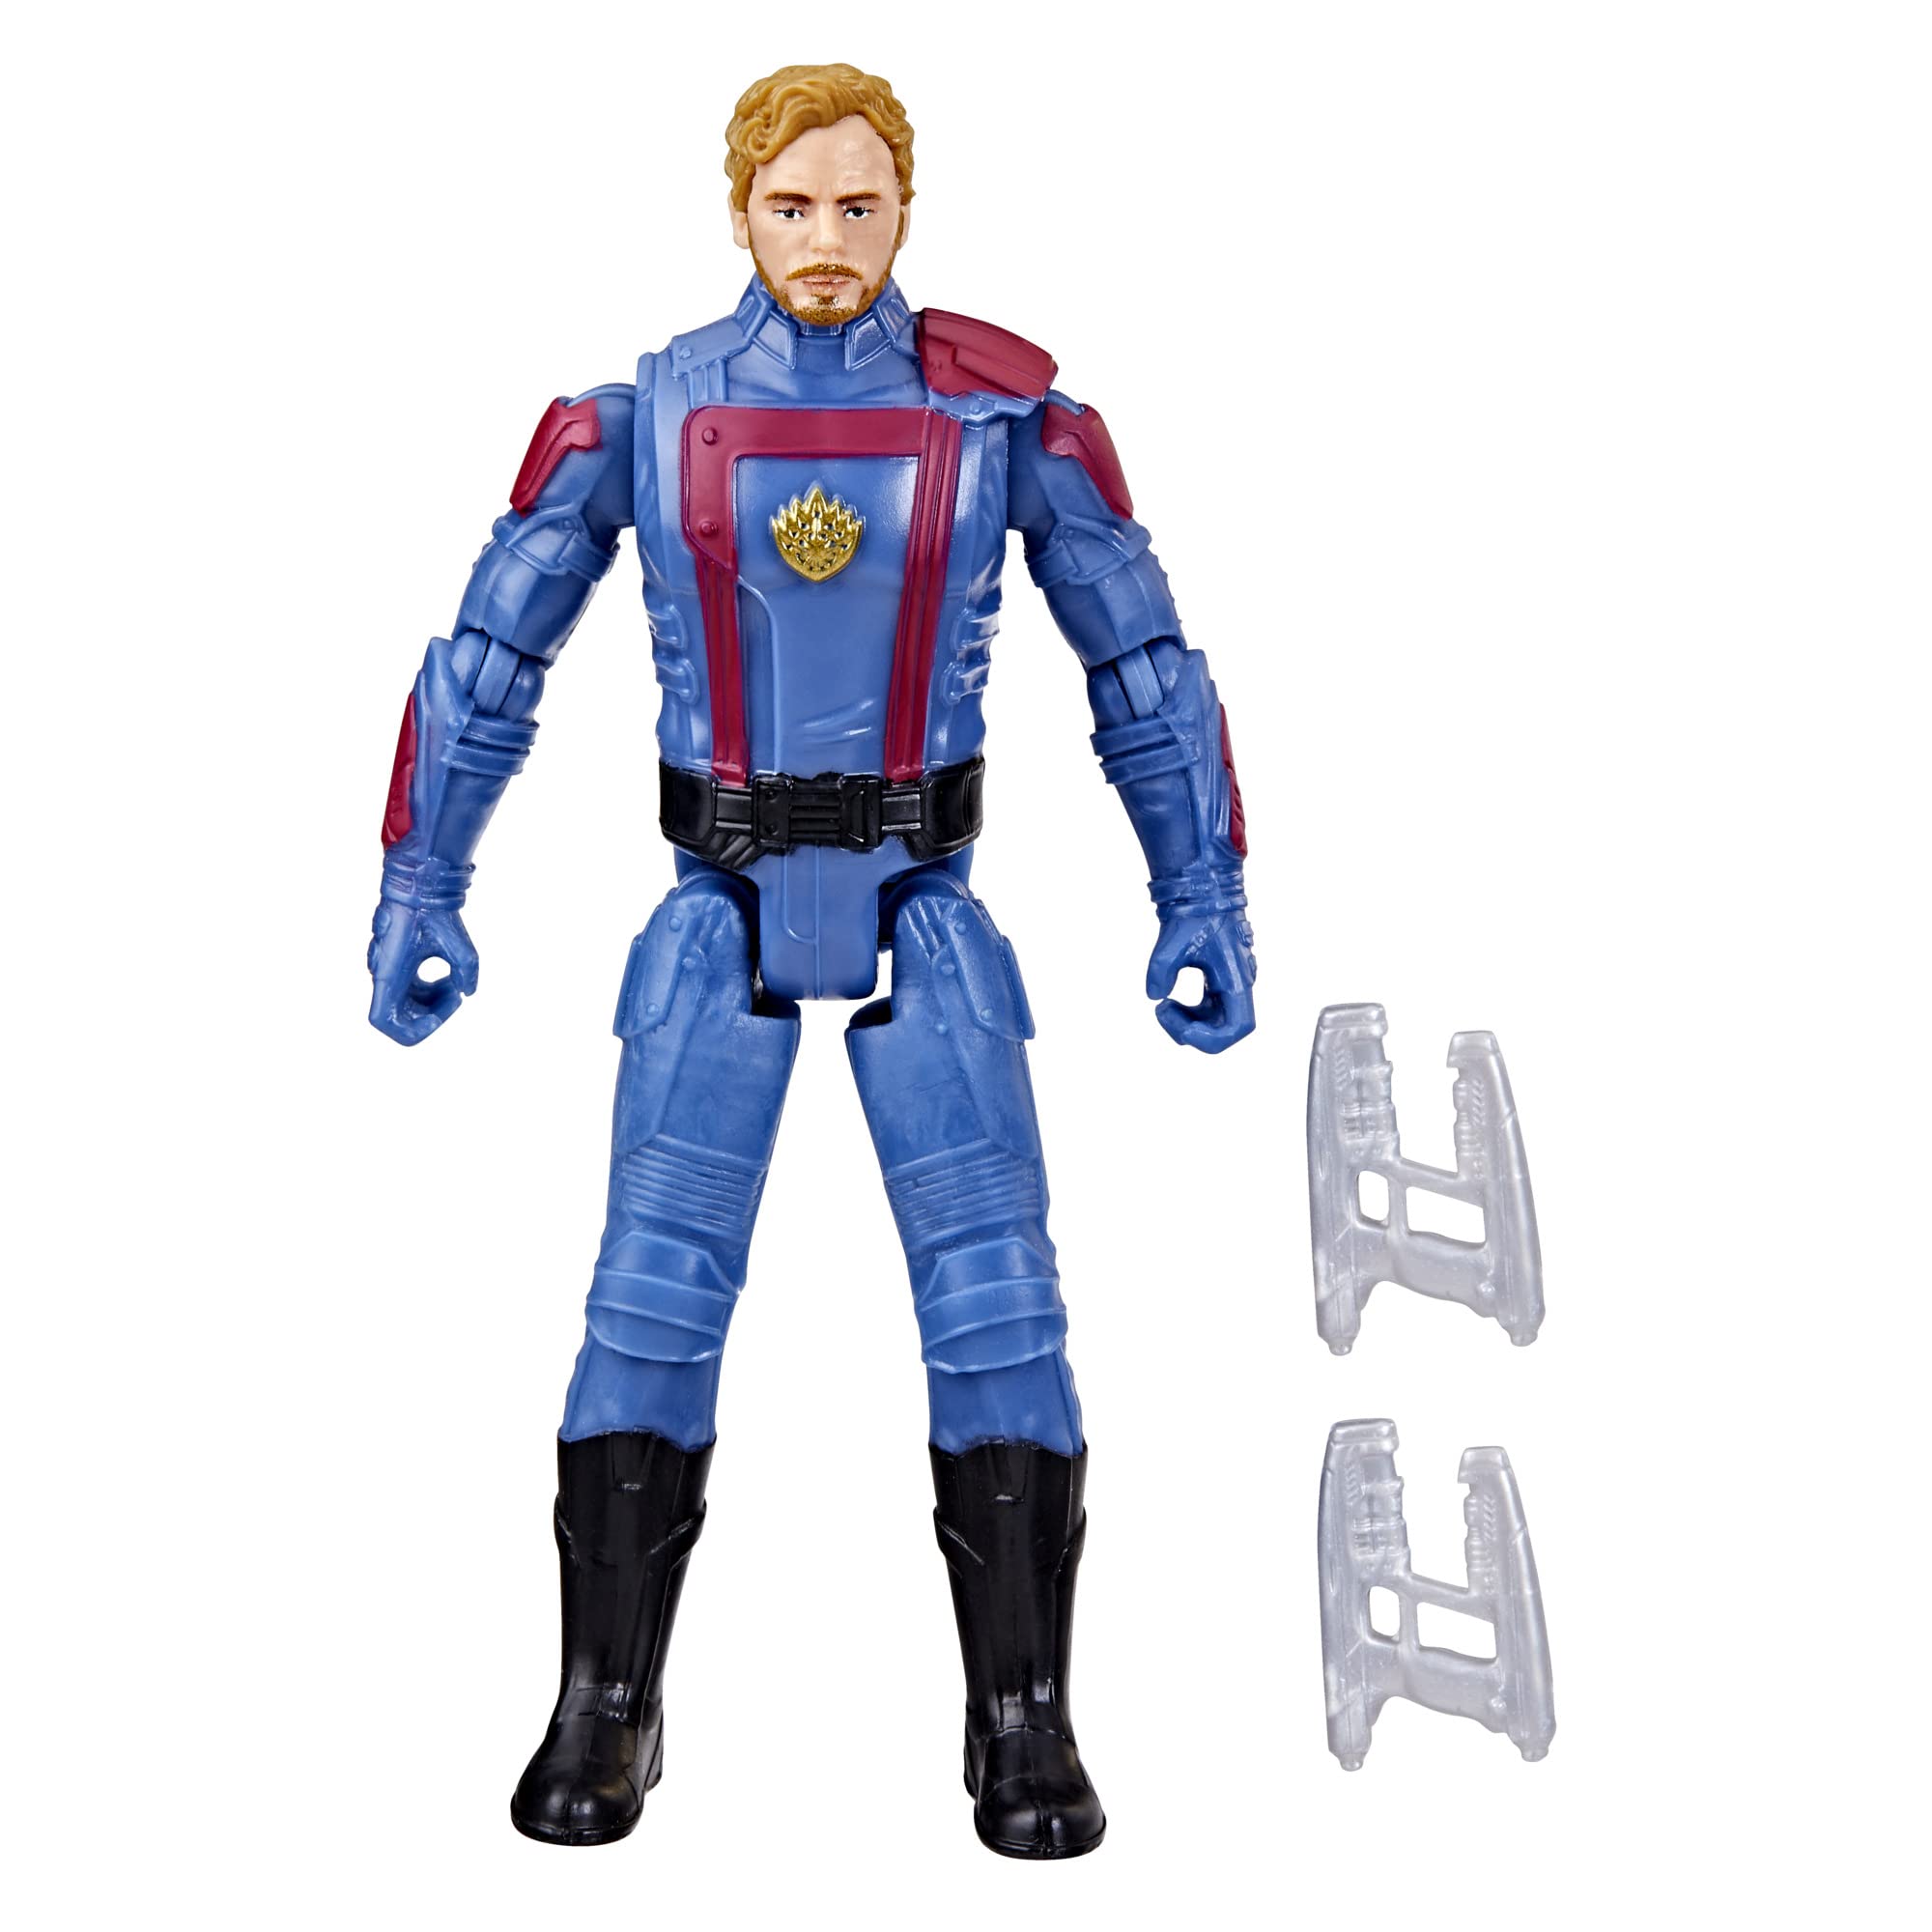 Marvel Hasbro Studios’ Guardians of The Galaxy Vol.3 Star-Lord Action Figure,Epic Hero Series,Super Hero Toys for Kids Ages 4 and Up,Toys